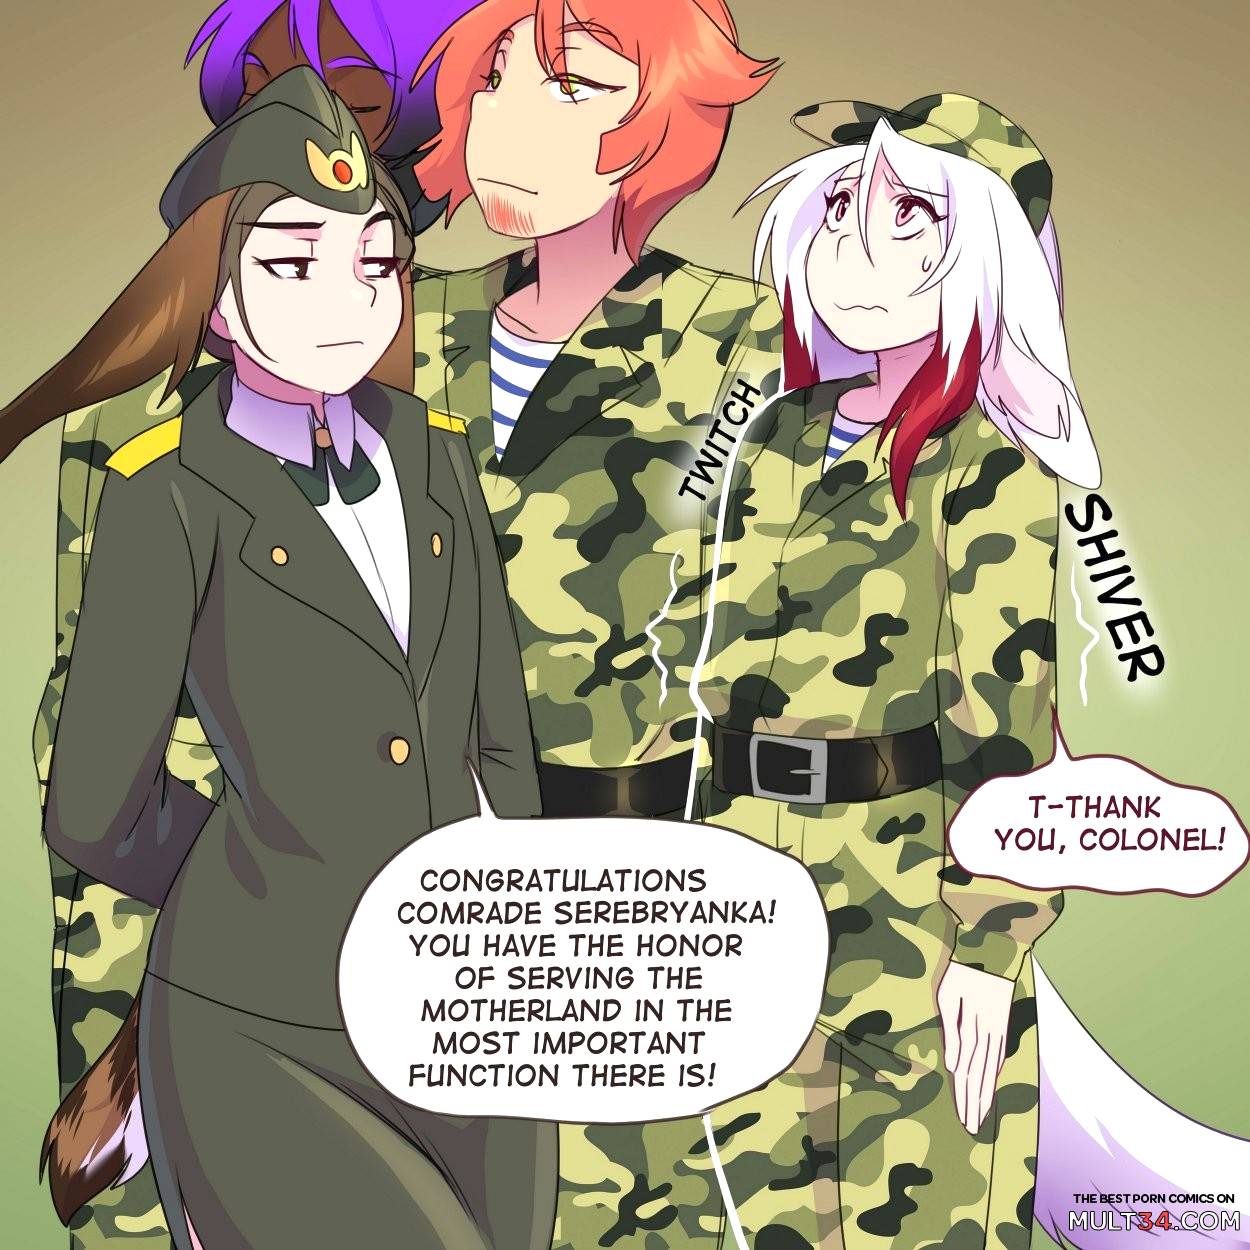 Cartoon Russian Porn - Silver Joins the Russian Army! porn comic - the best cartoon porn comics,  Rule 34 | MULT34